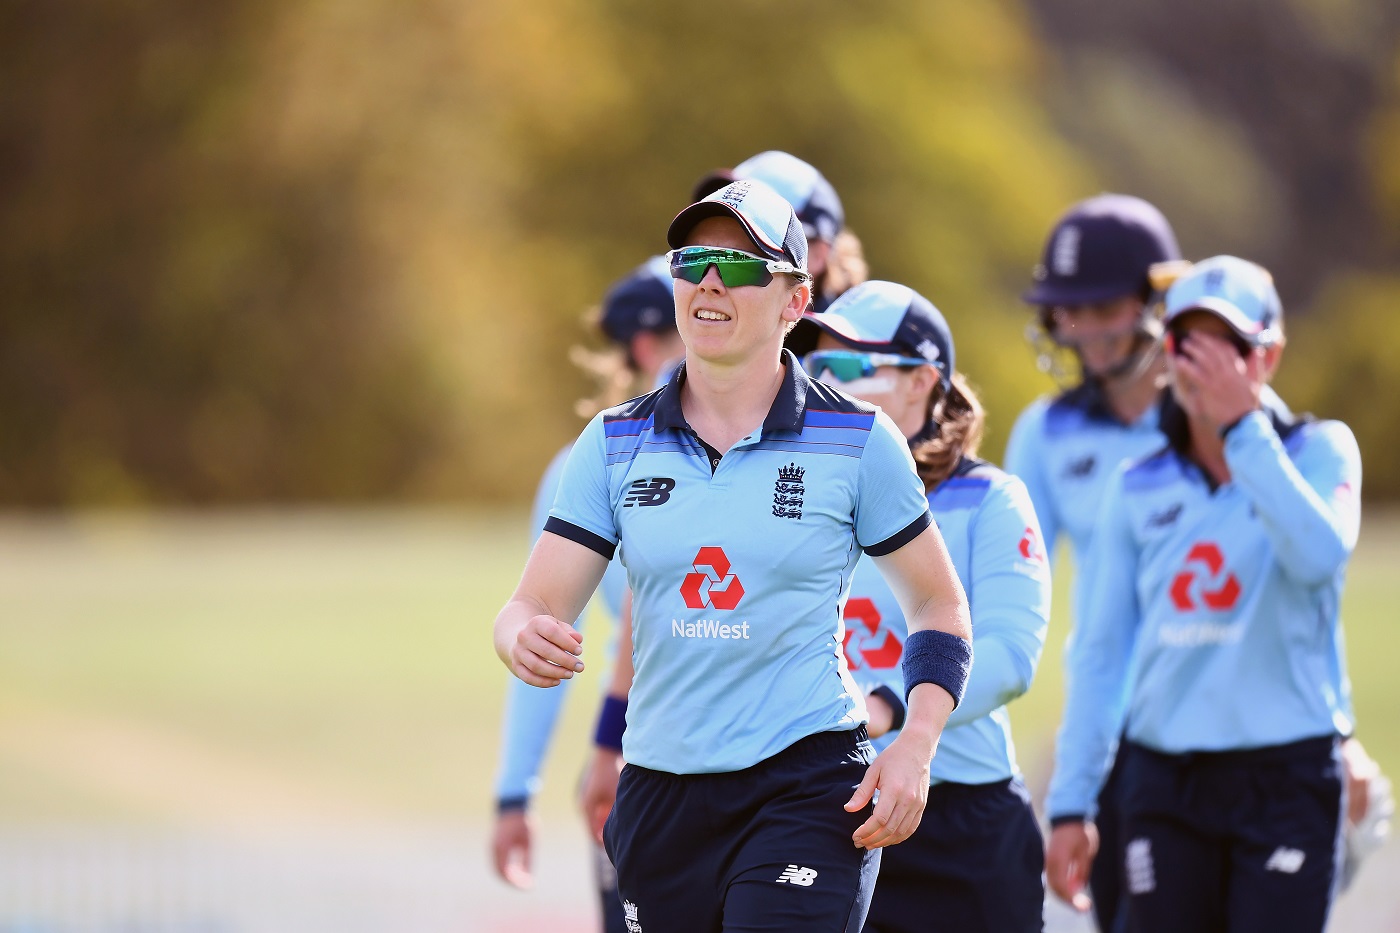 Women's Ashes 2021-22 - Covid-19 positive hits England party ahead of  Women's Ashes start